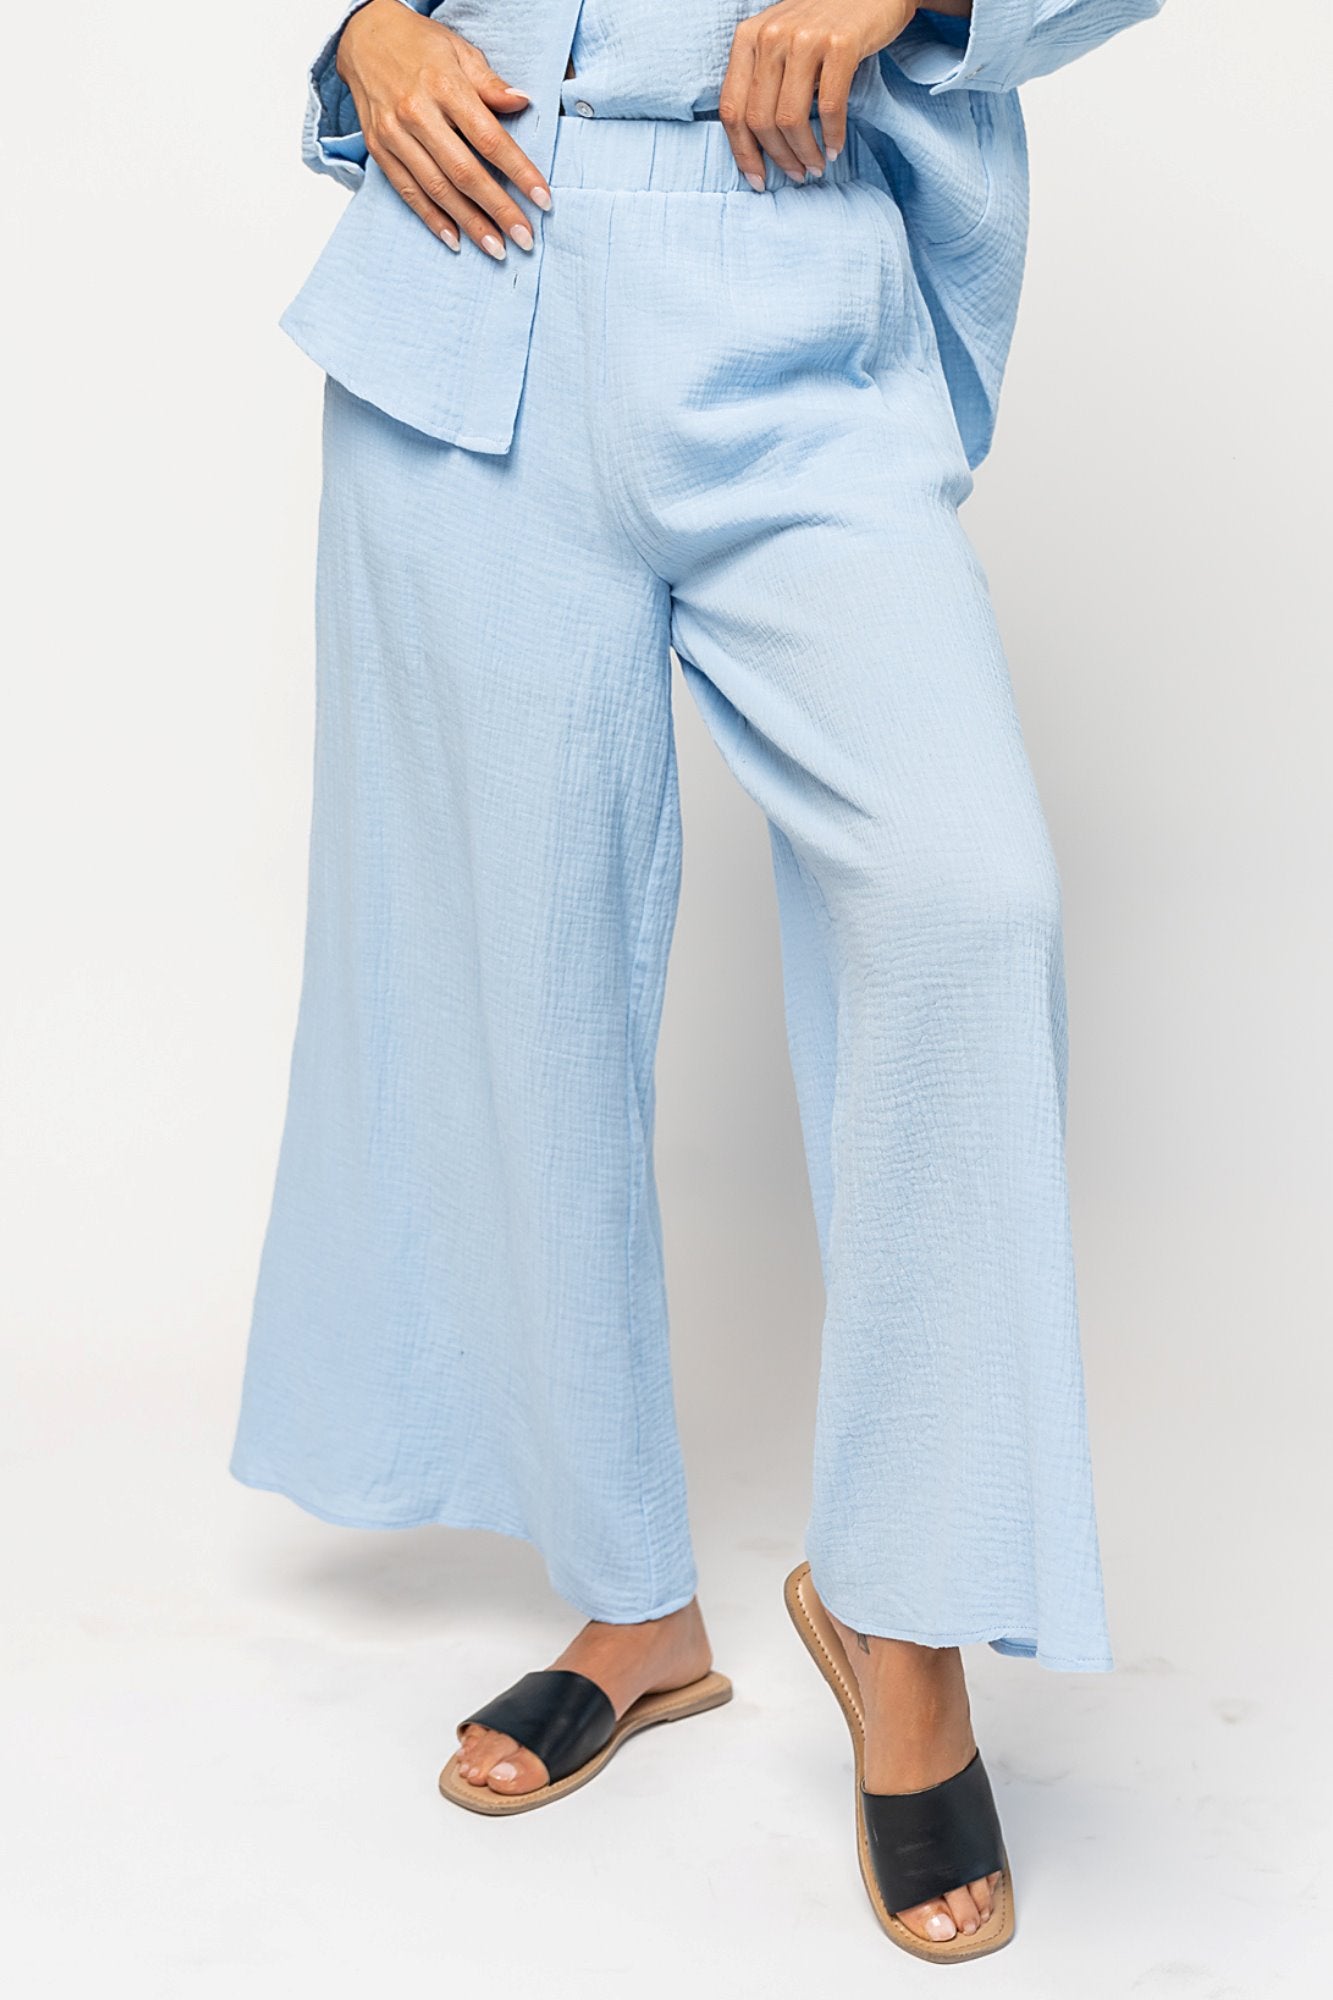 Mallory Pant in Sky Holley Girl 